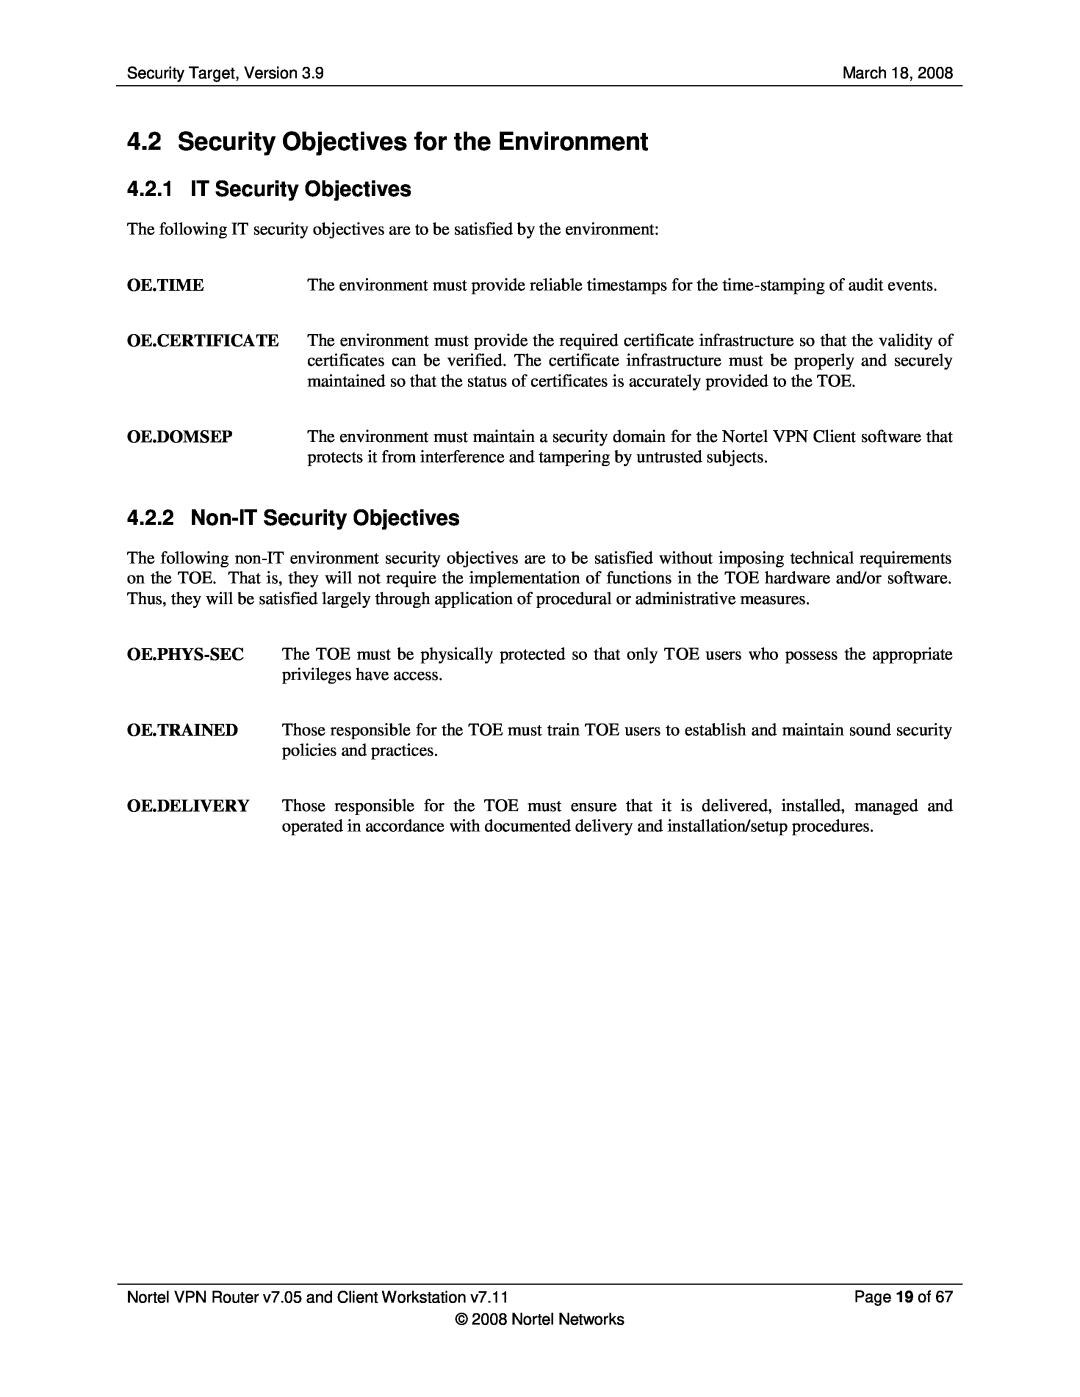 Nortel Networks 7.11, 7.05 manual Security Objectives for the Environment, Non-IT Security Objectives 